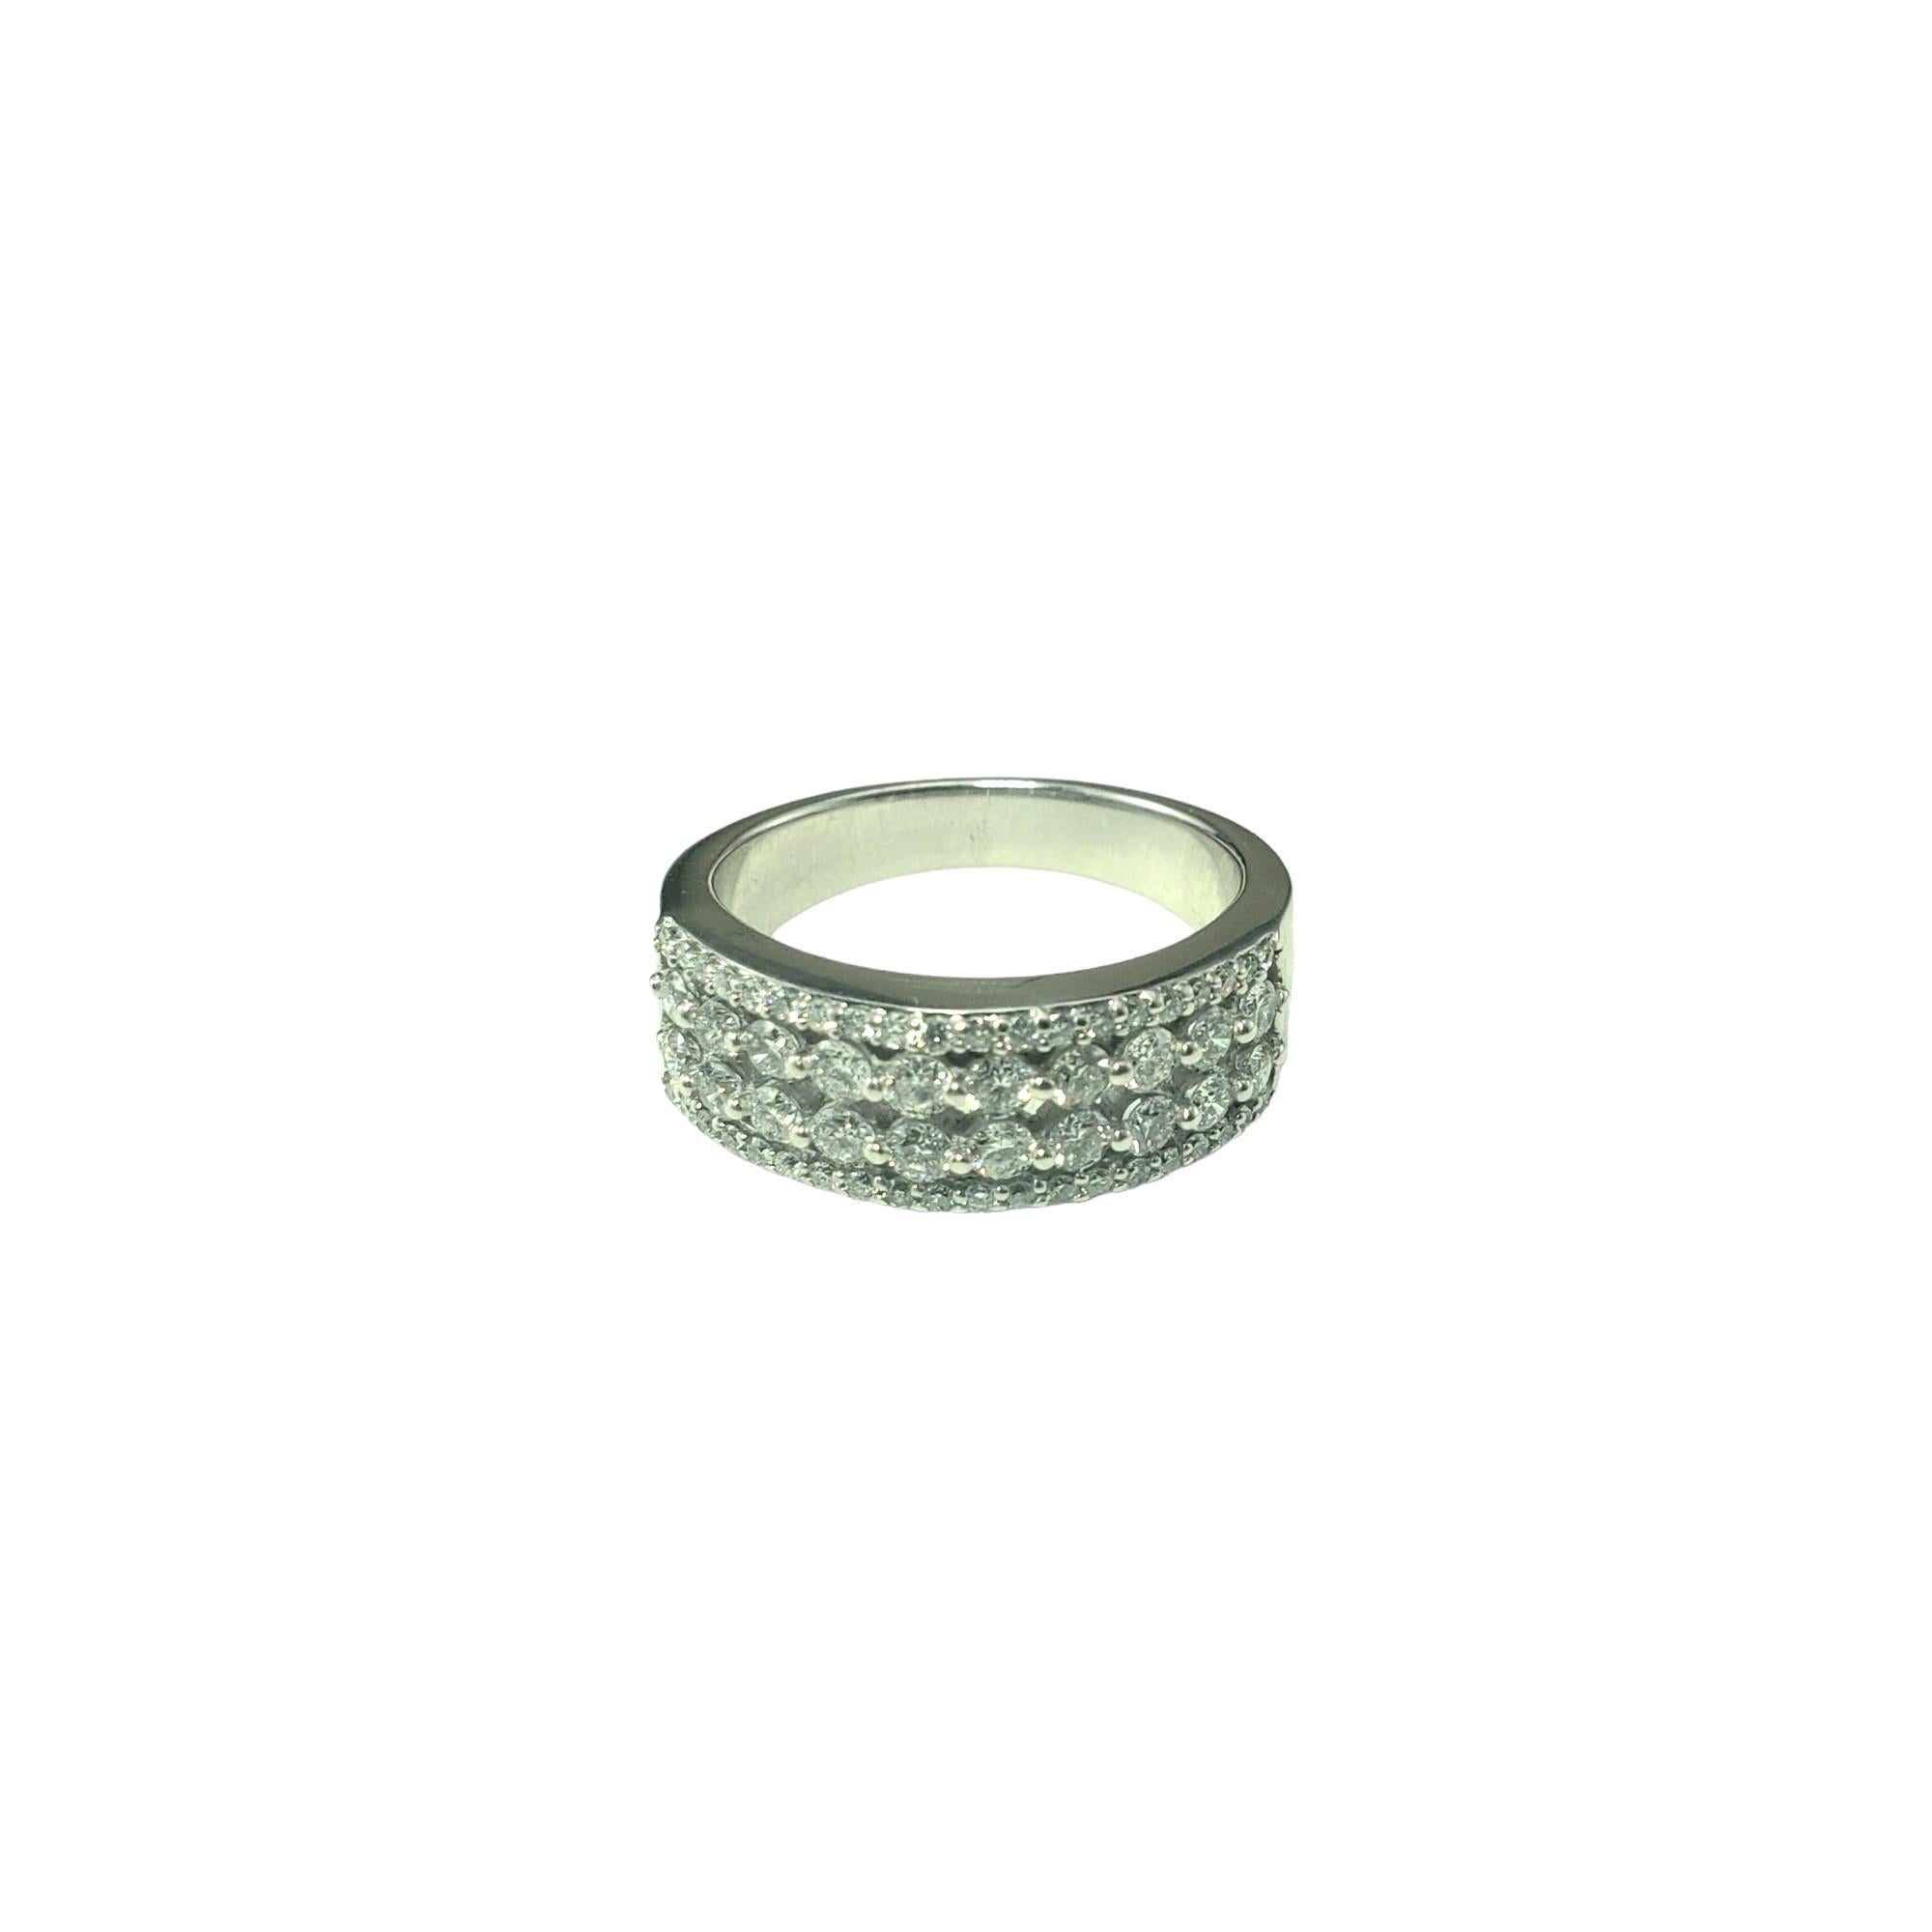 14 Karat White Gold and Diamond Band Ring Size 7-7.25

This sparkling band features 60 round brilliant cut diamonds set in classic 14K white gold.  

Width: 7 mm.
Shank: 4 mm.

Approximate total diamond weight: 1.20 ct.

Diamond color: G-I

Diamond